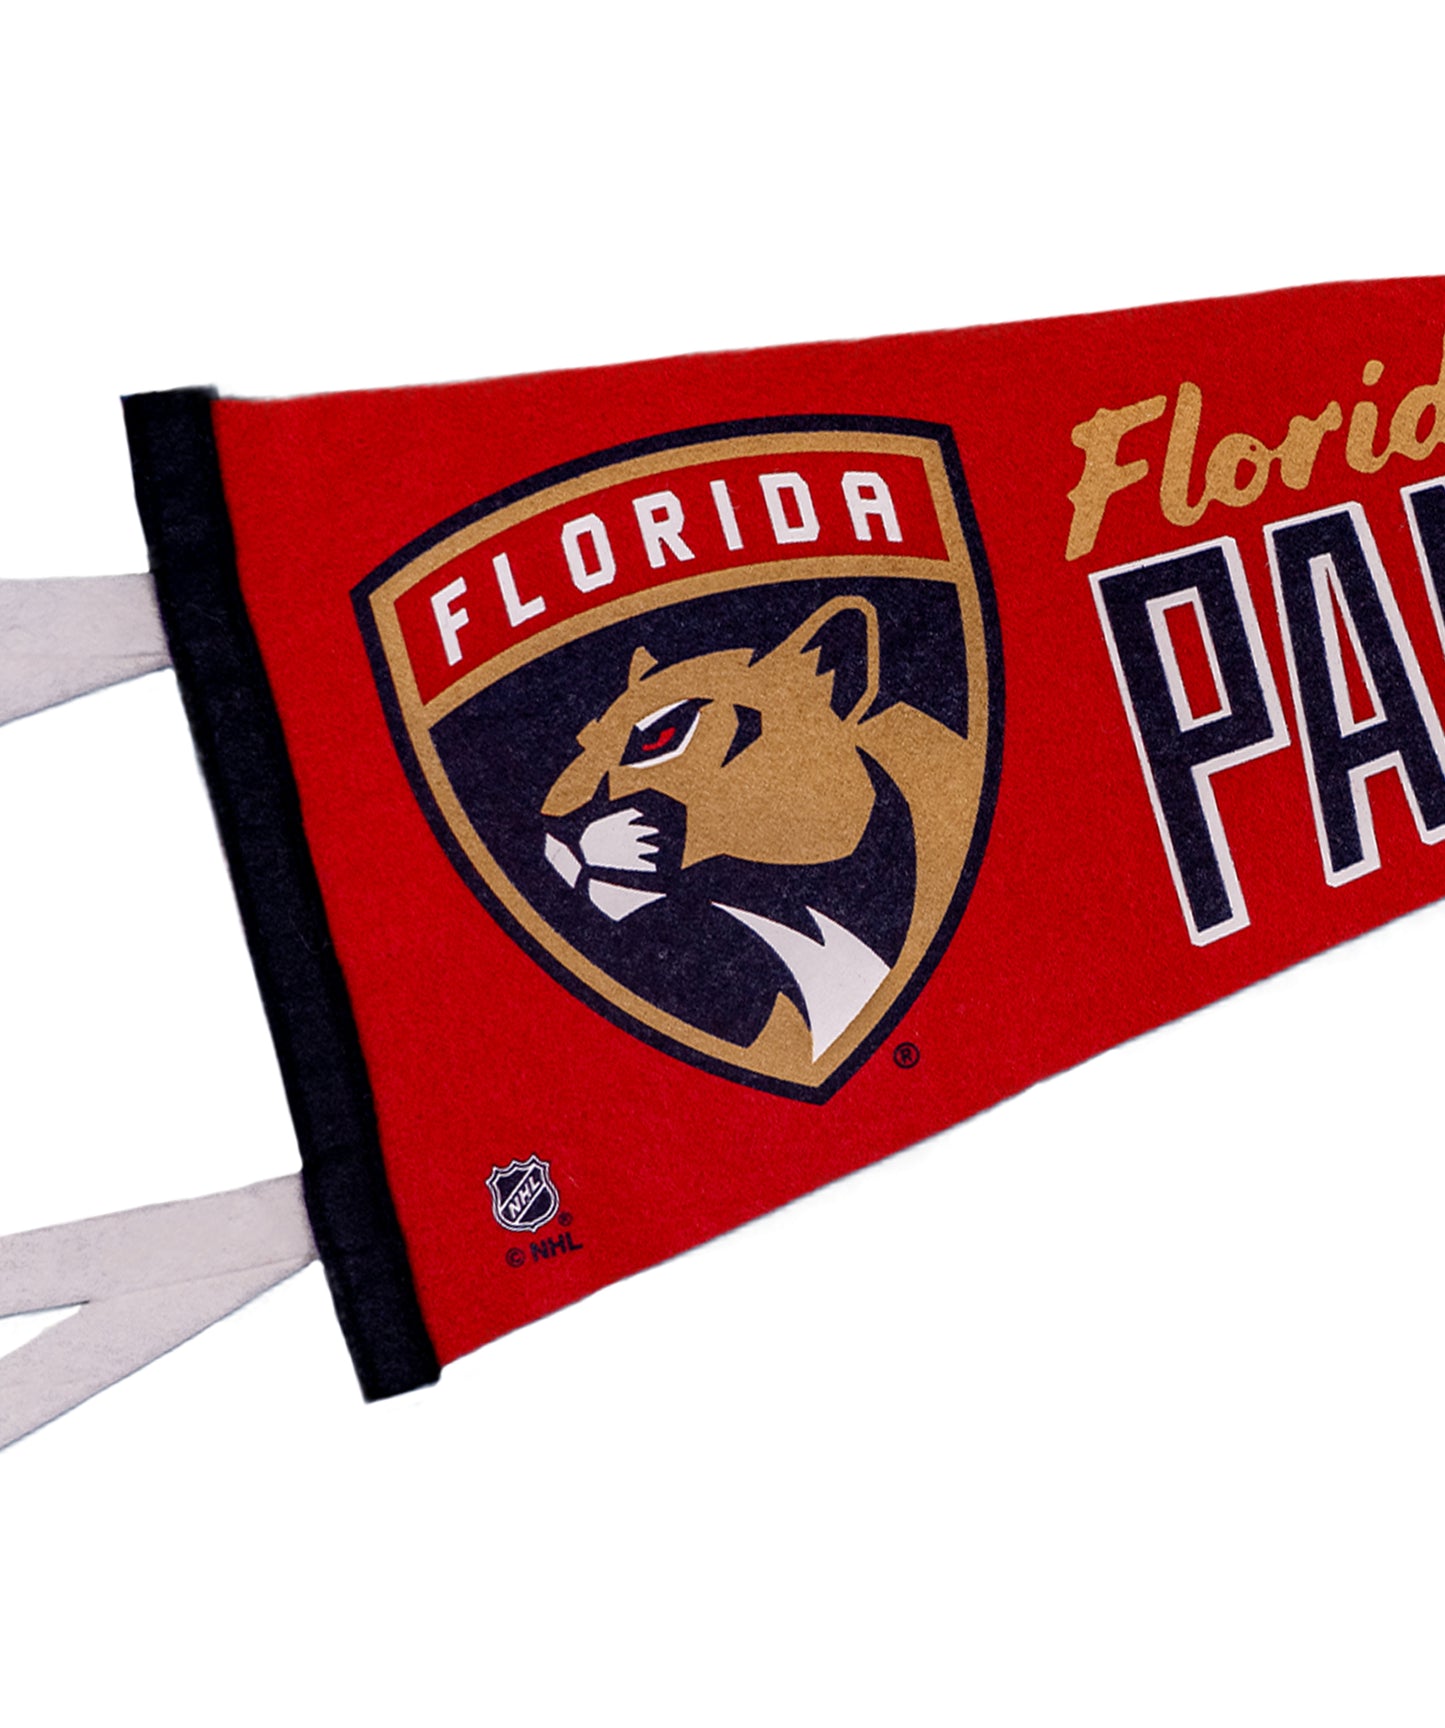 Florida Panthers Pennant • NHL x Oxford Pennant